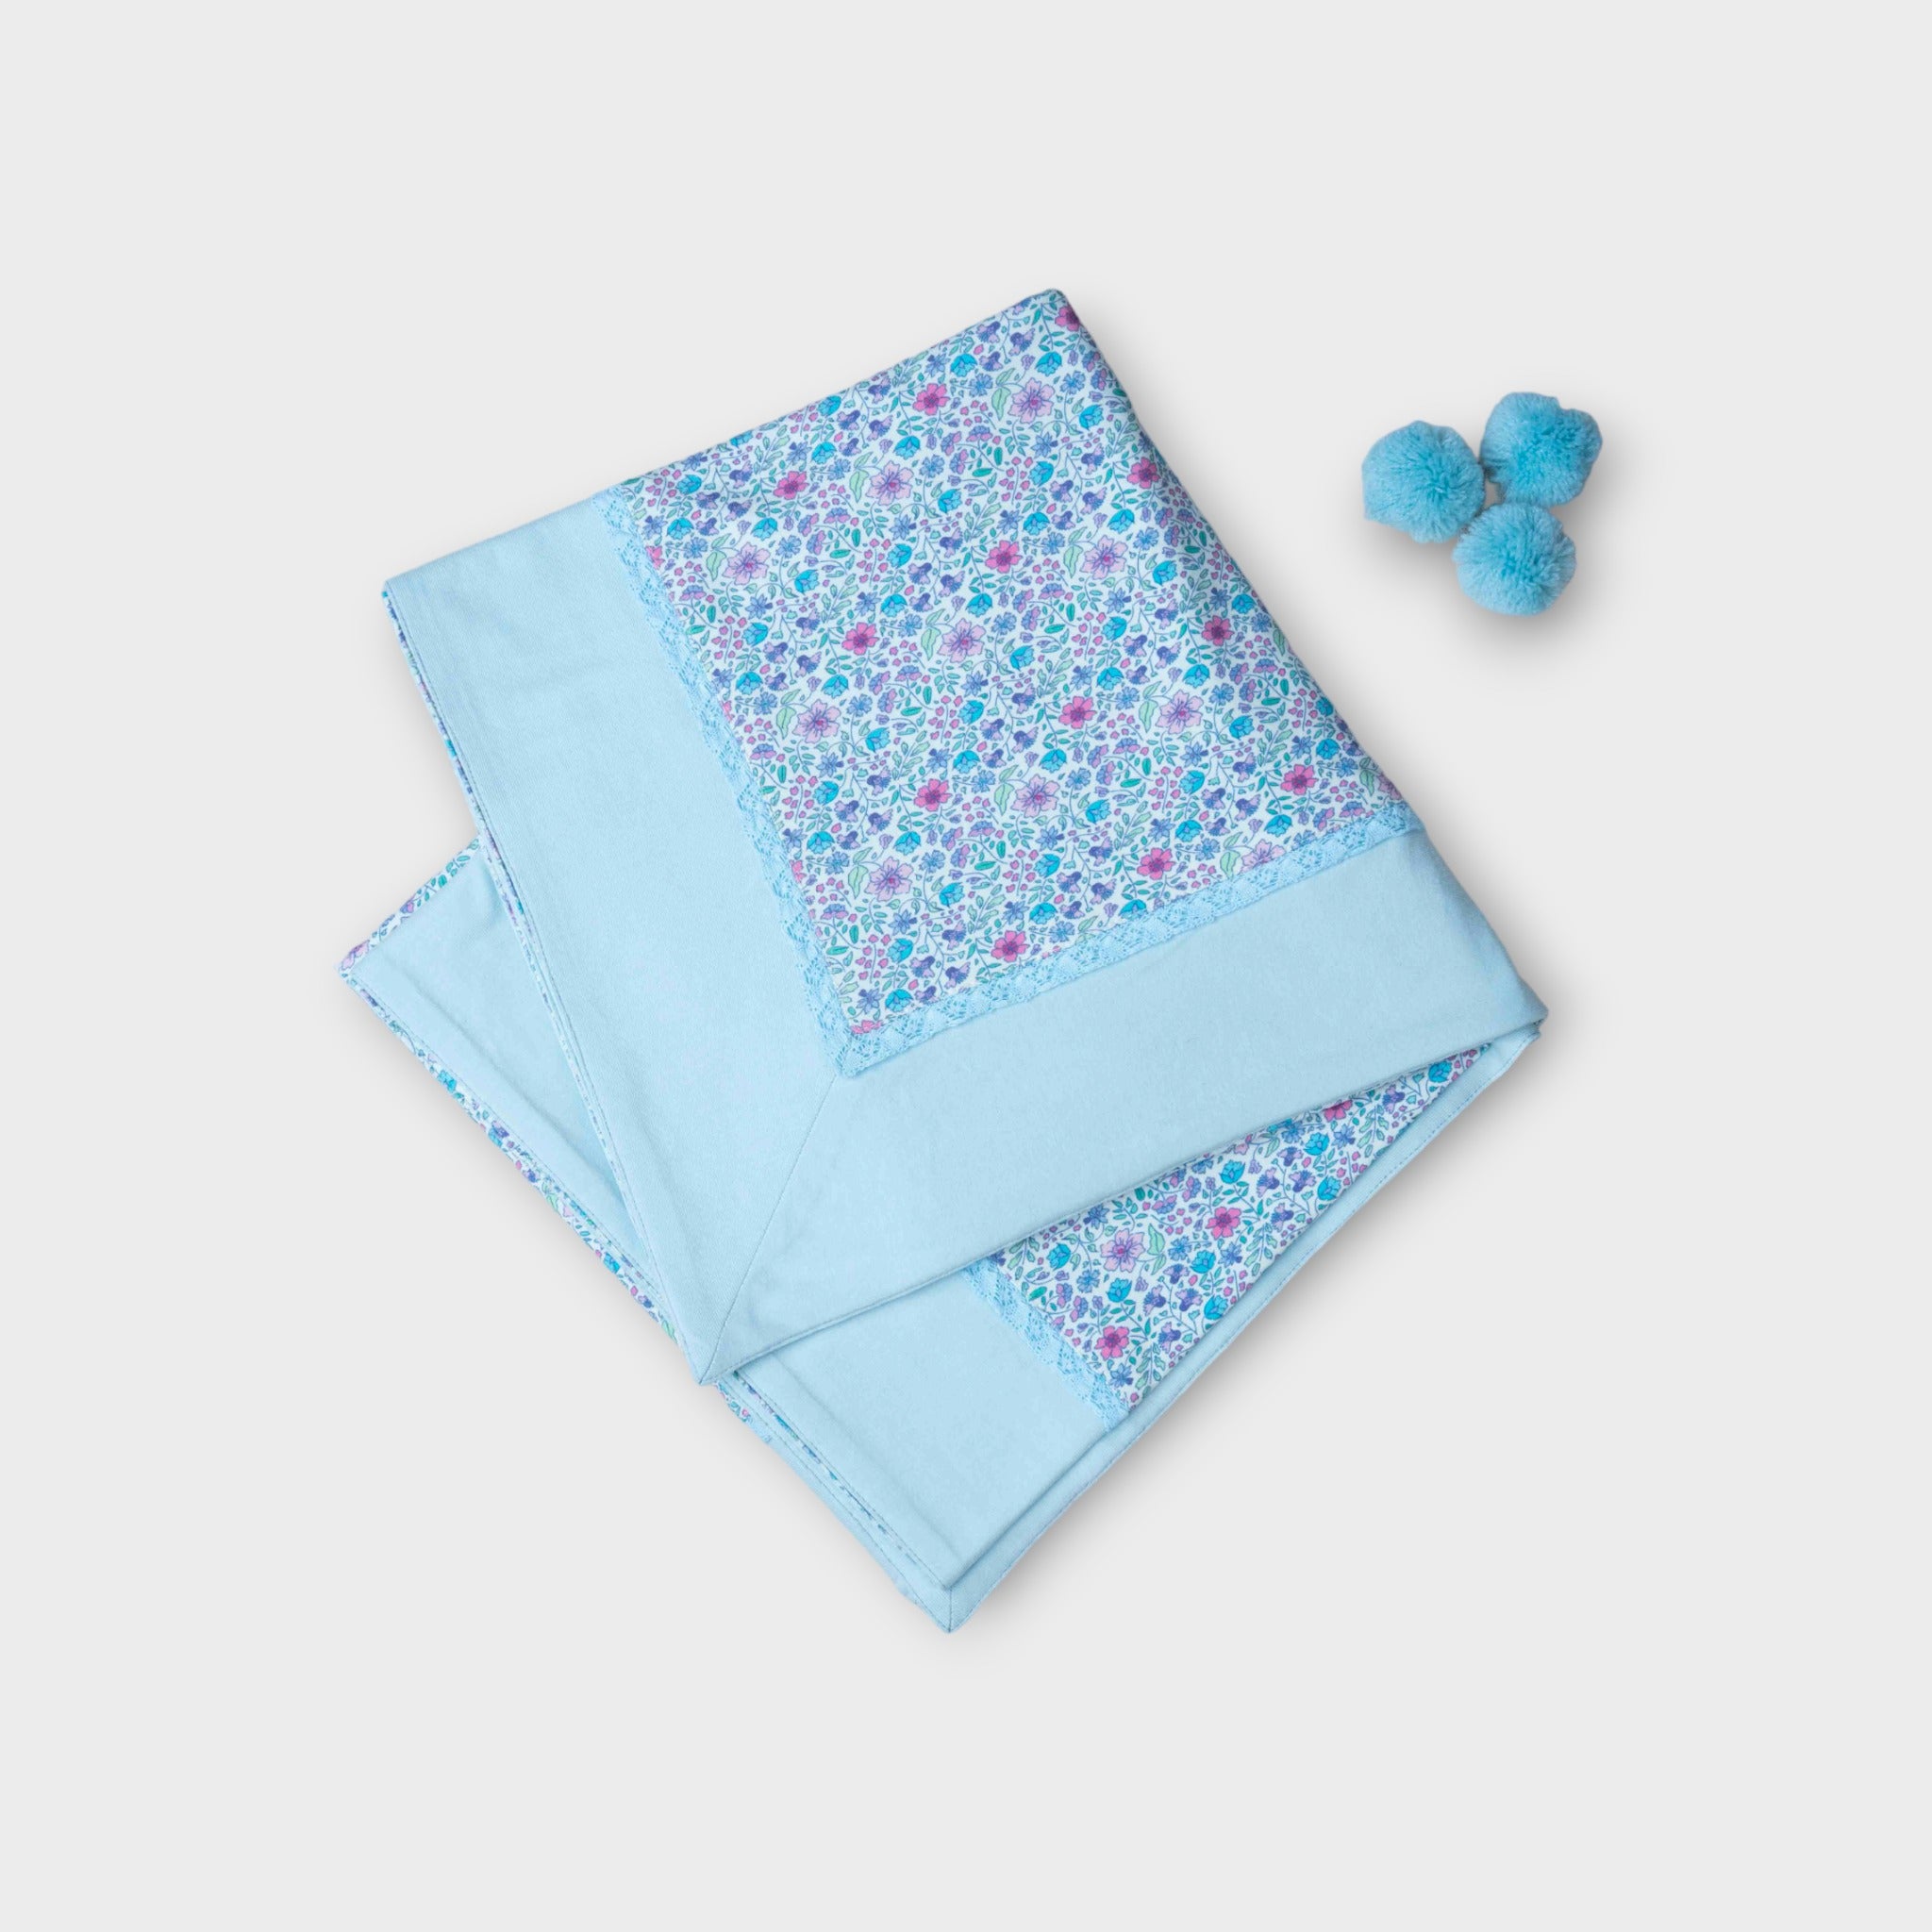 DOUBLE LAYER BLANKET WITH SOFT LACE INSERT | DITSY BLUE